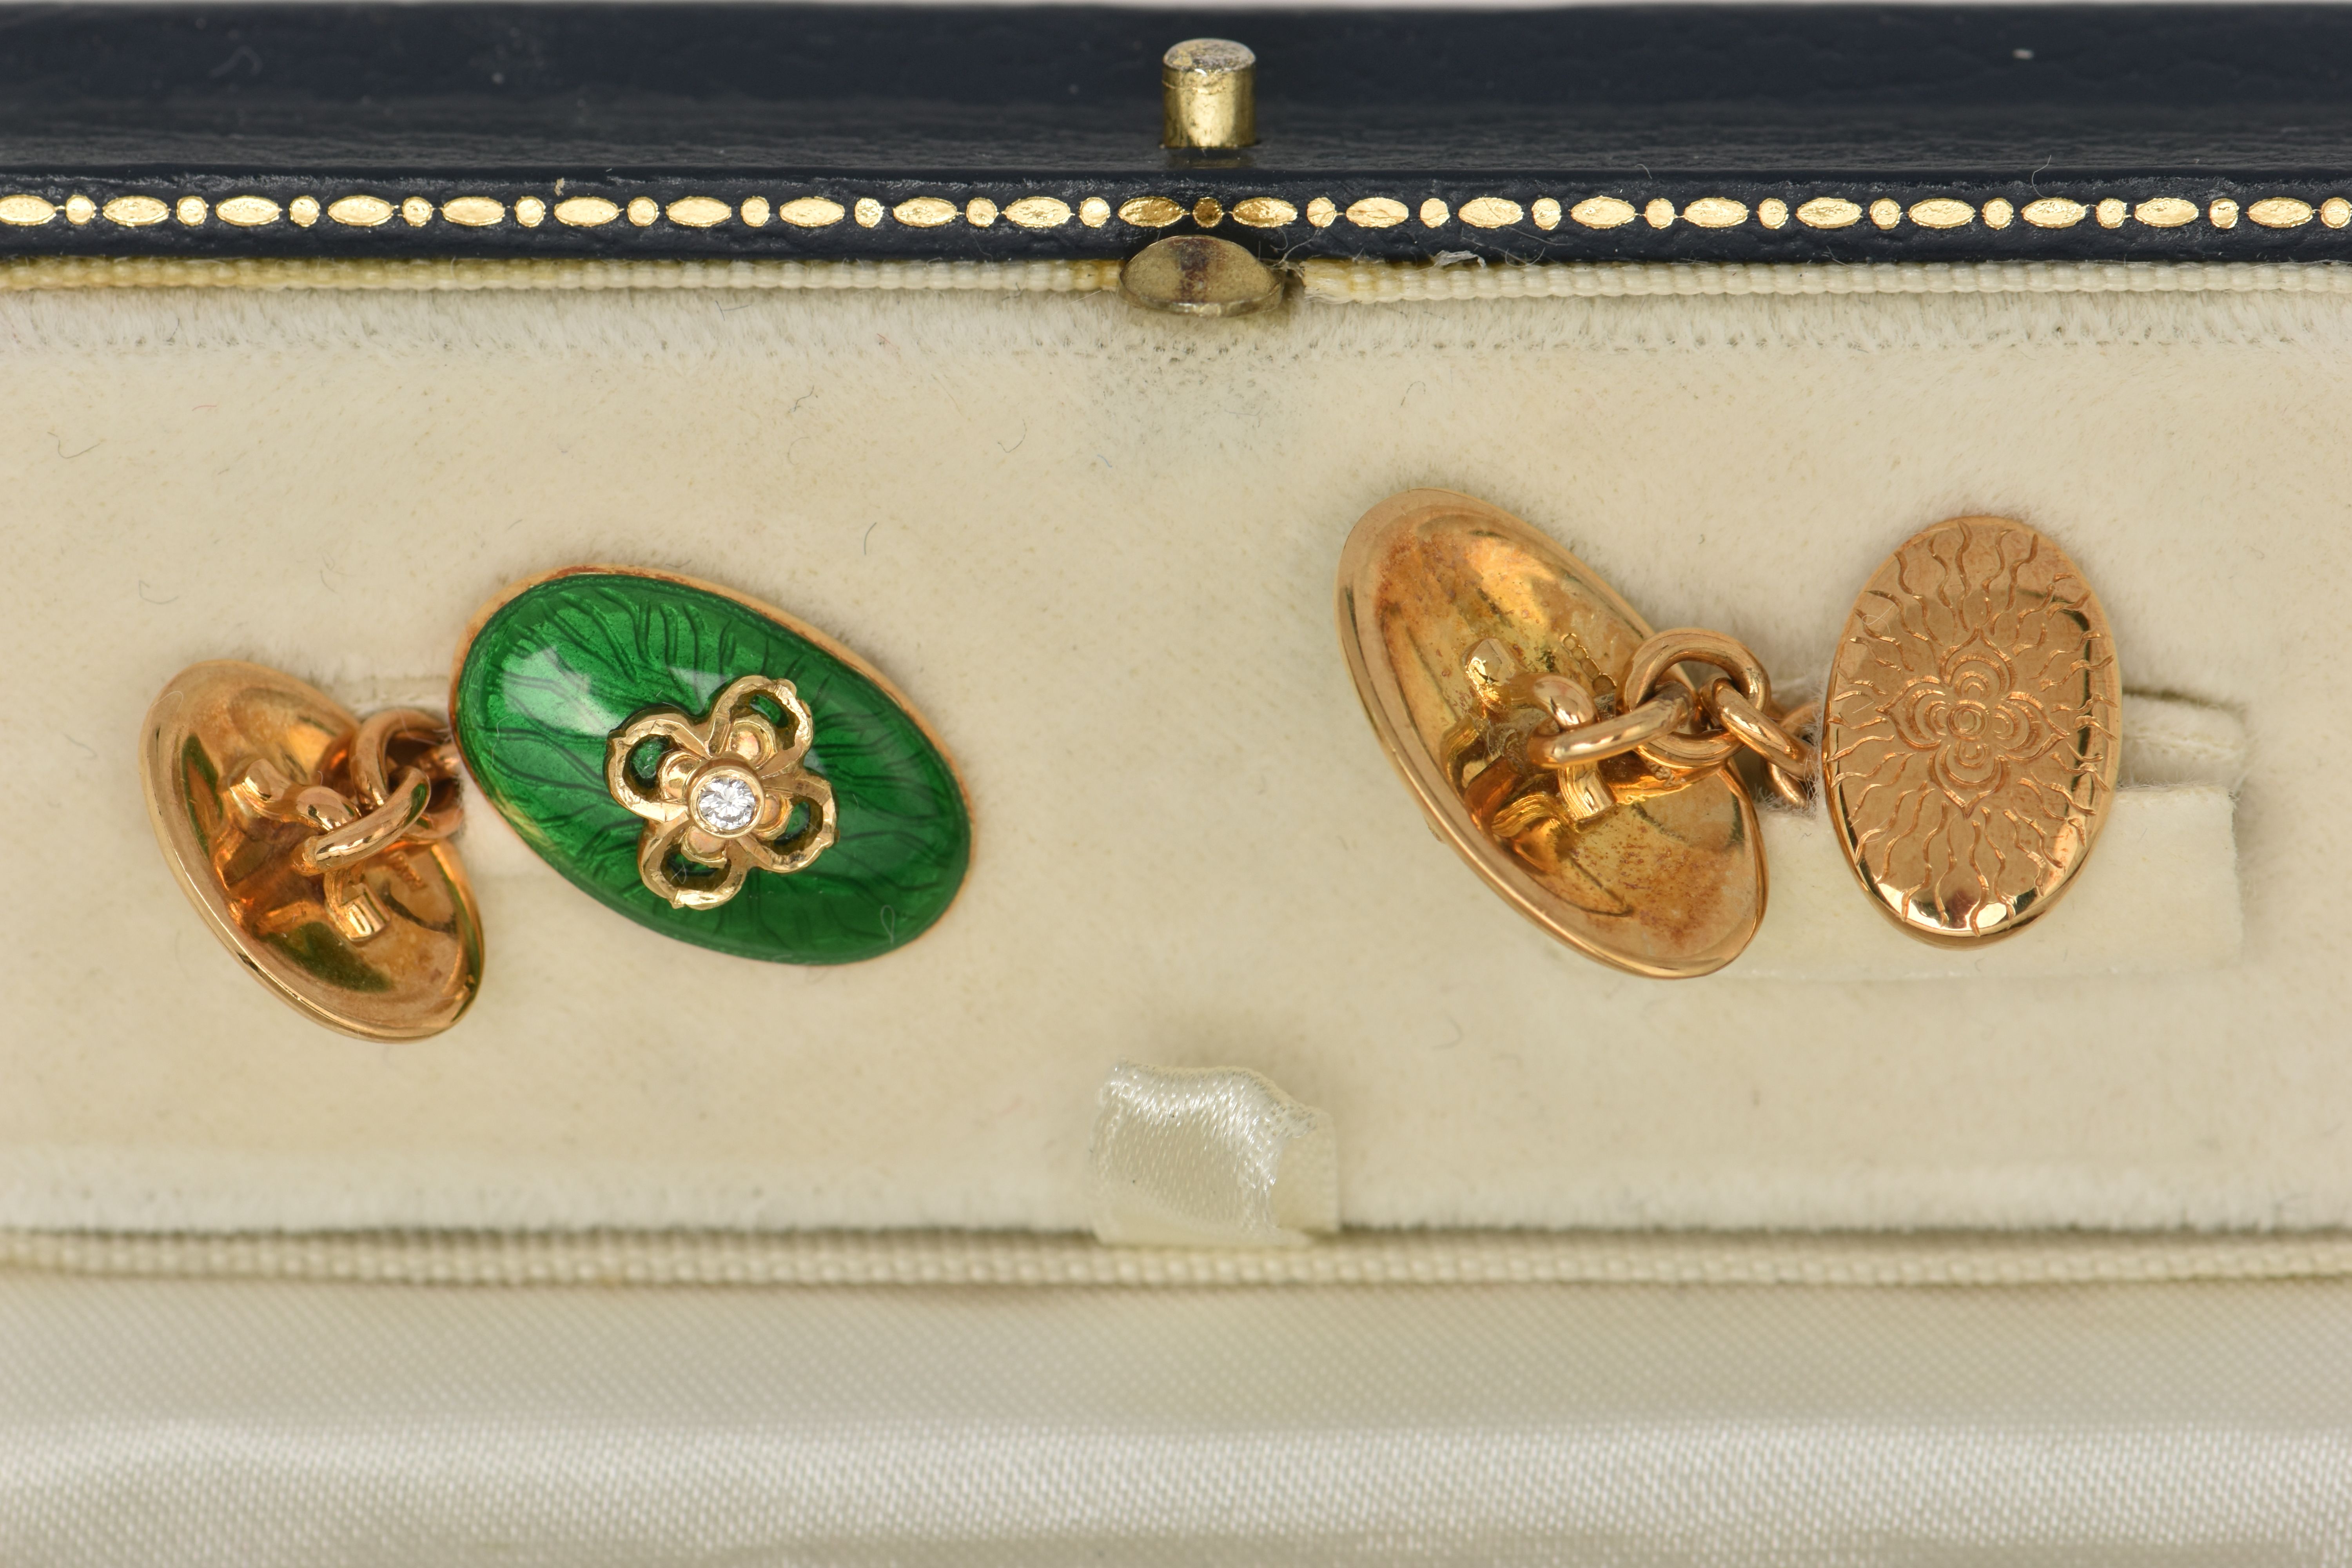 A PAIR OF 18CT GOLD ENAMEL AND DIAMOND CUFFLINKS, each designed as an oval green enamel panel with - Image 4 of 4